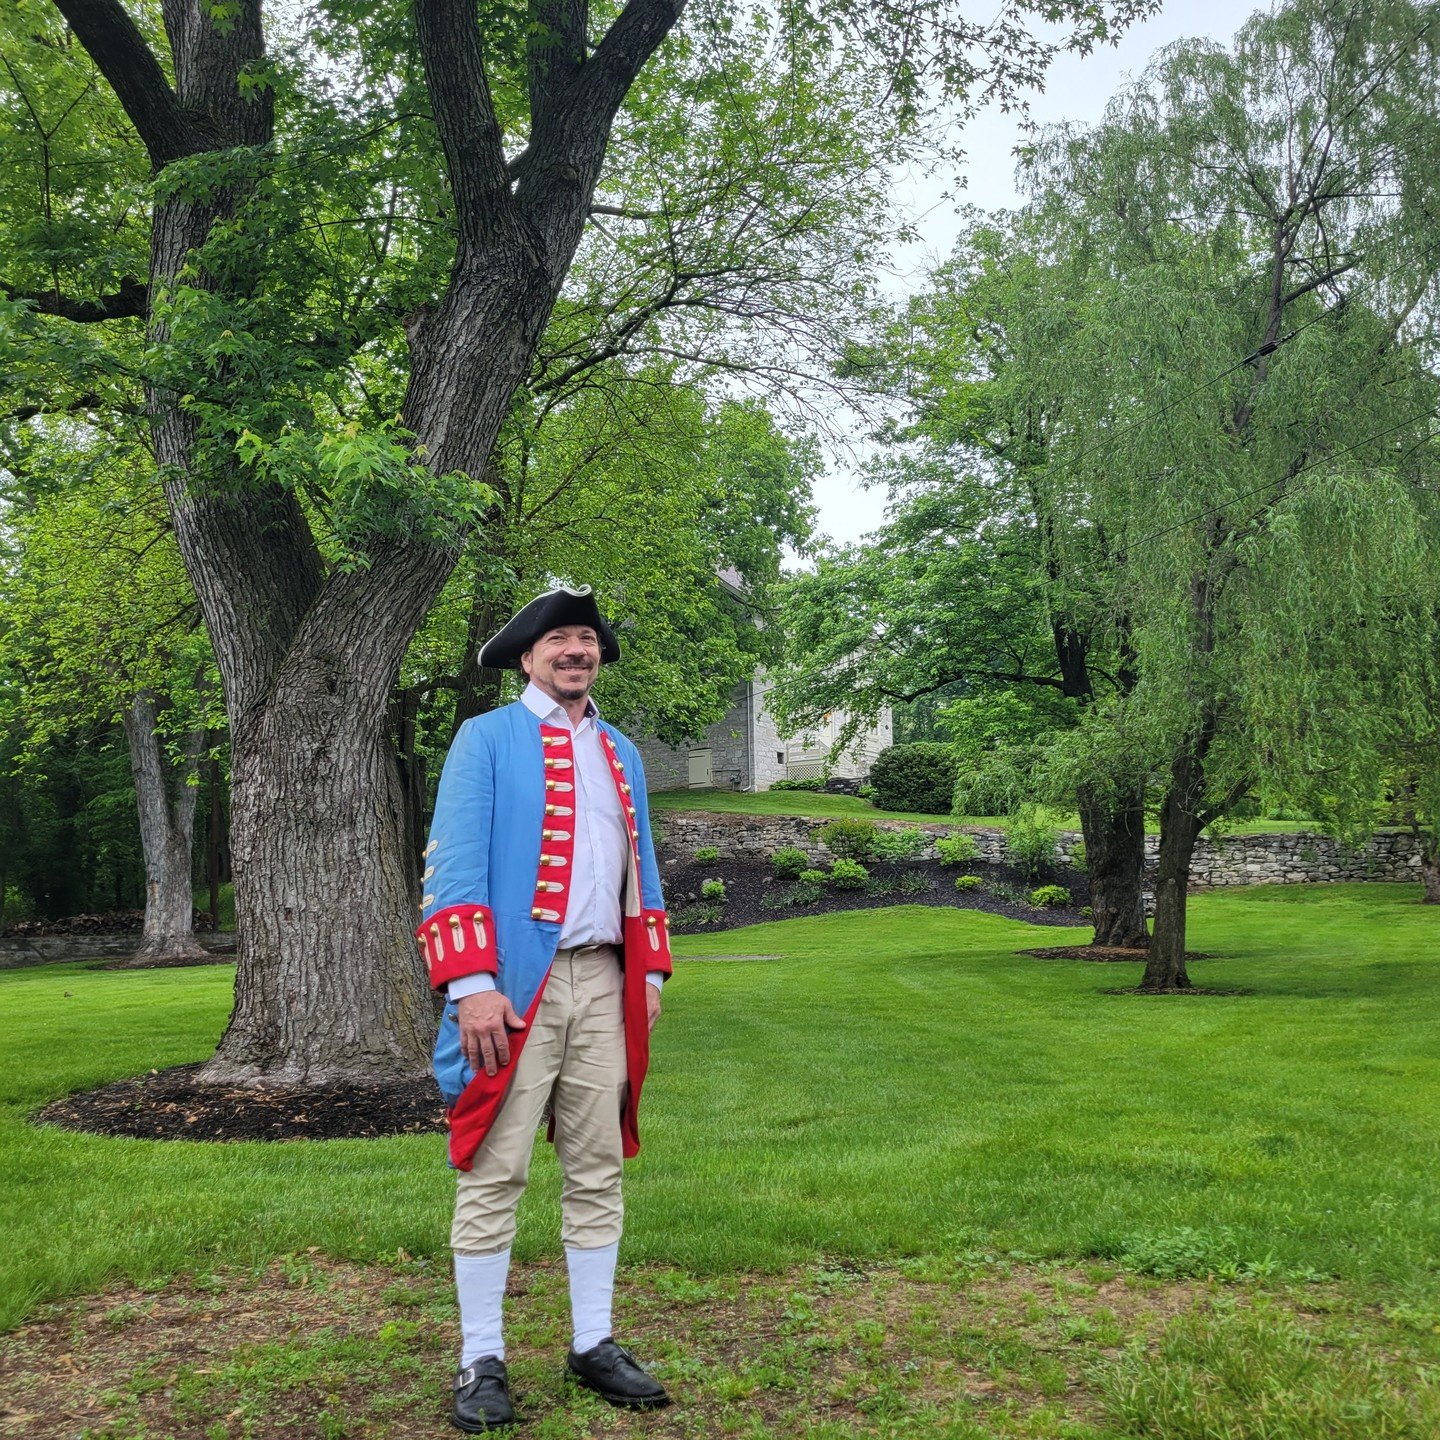 Save the date for May 17 - May 19 for Founders Day / Martinsburg Heritage Fair &amp; Festival. 
Visit https://www.roundhousewv.com/heritagefestival for the complete schedule of events.
Don't forget to stop by the General Adam Stephen House and say &q